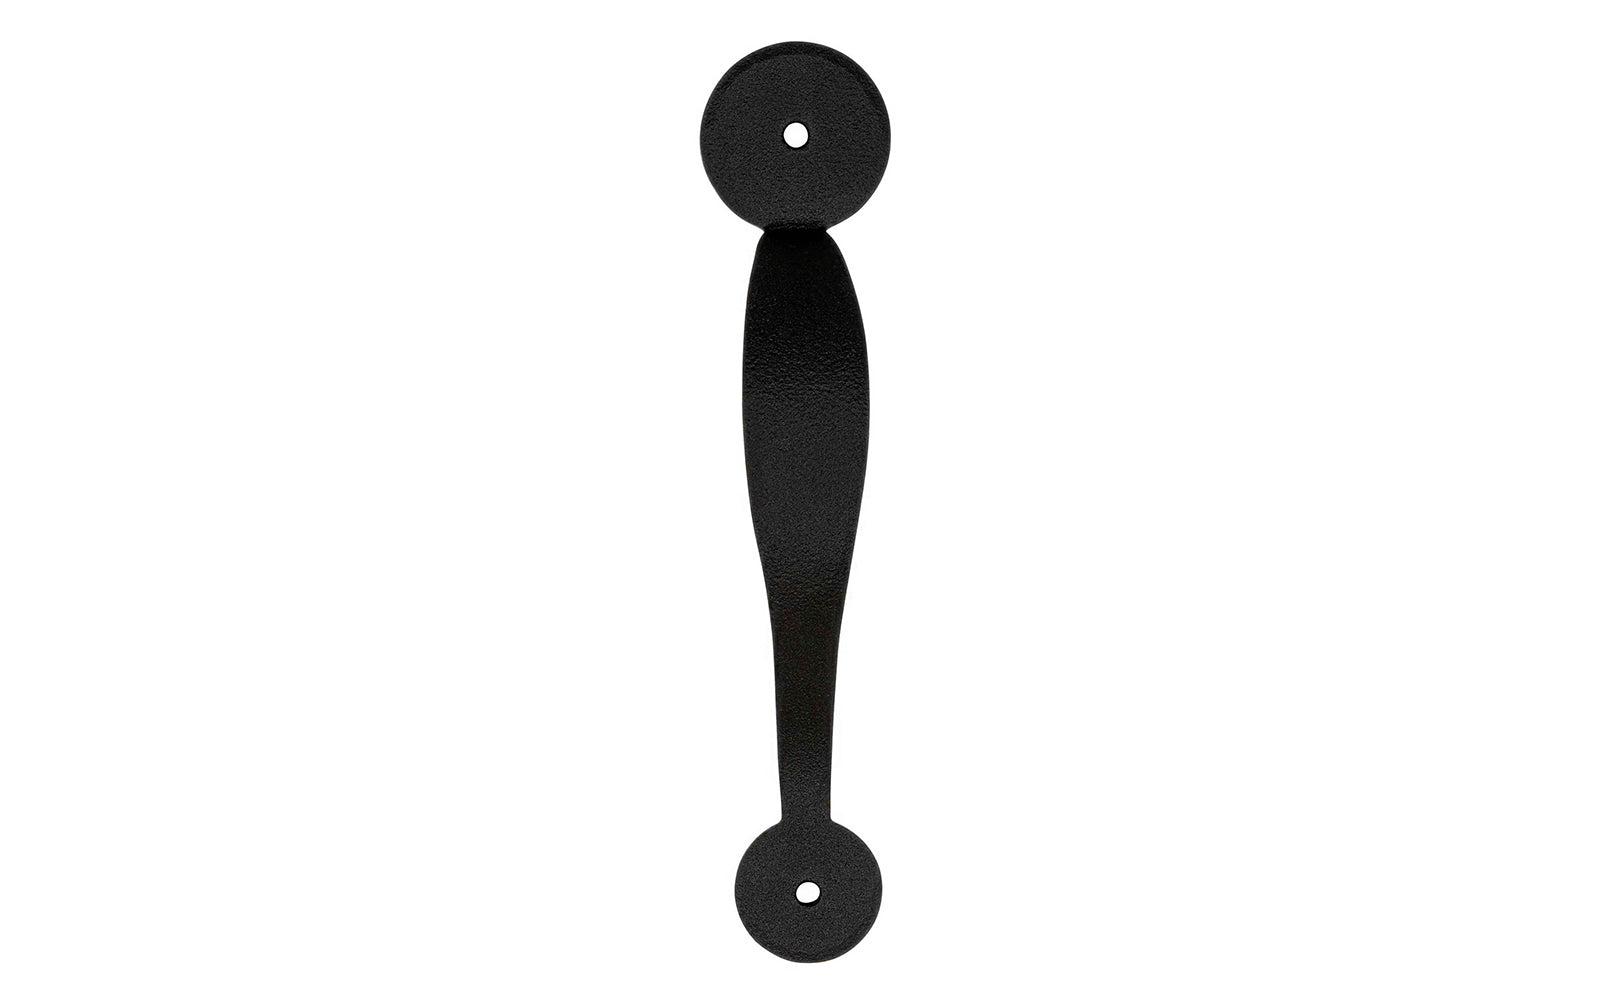 A hand-forged door pull handle with circle end tips. Steel material with a black finish, it has a nice durable feel. This traditional-looking piece of hardware is great for doors, gates, & large cabinets. Powder coated to resist rust. Circle tips - Early-American Style - Cast Iron - 7" overall length - Model 88491